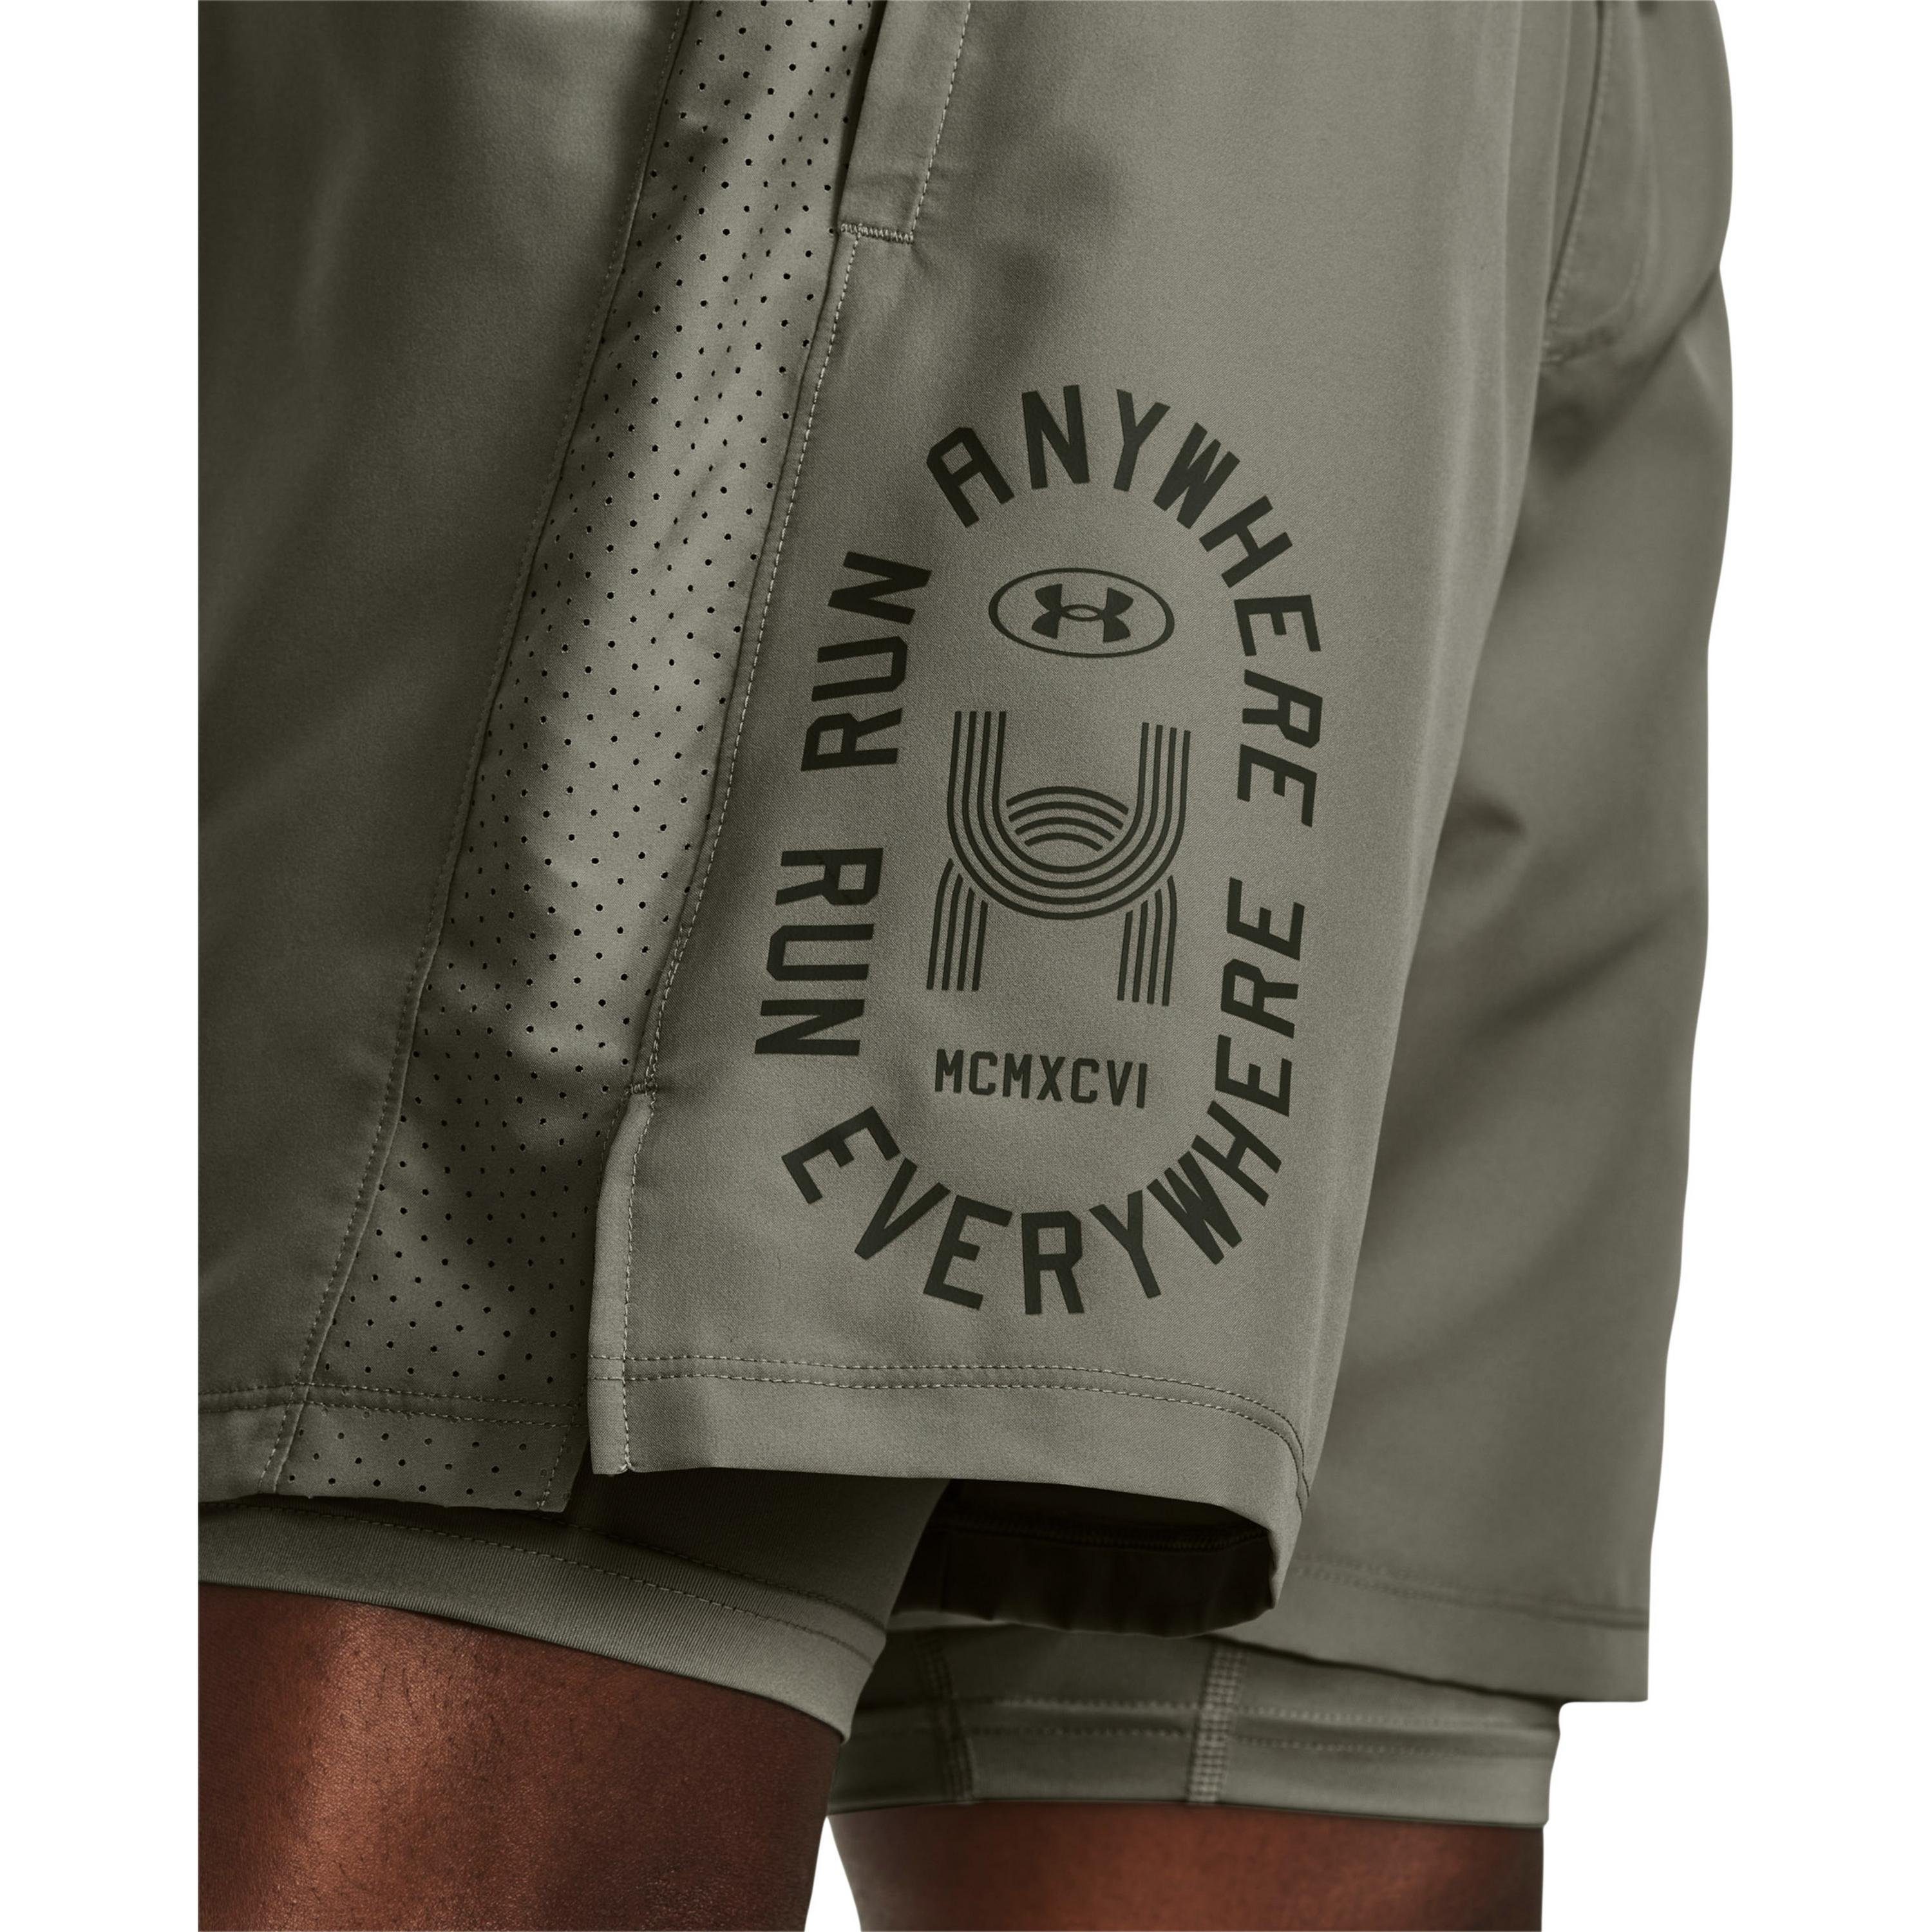 Armour® Under EVERYWHERE grove Funktionsshorts green RUN